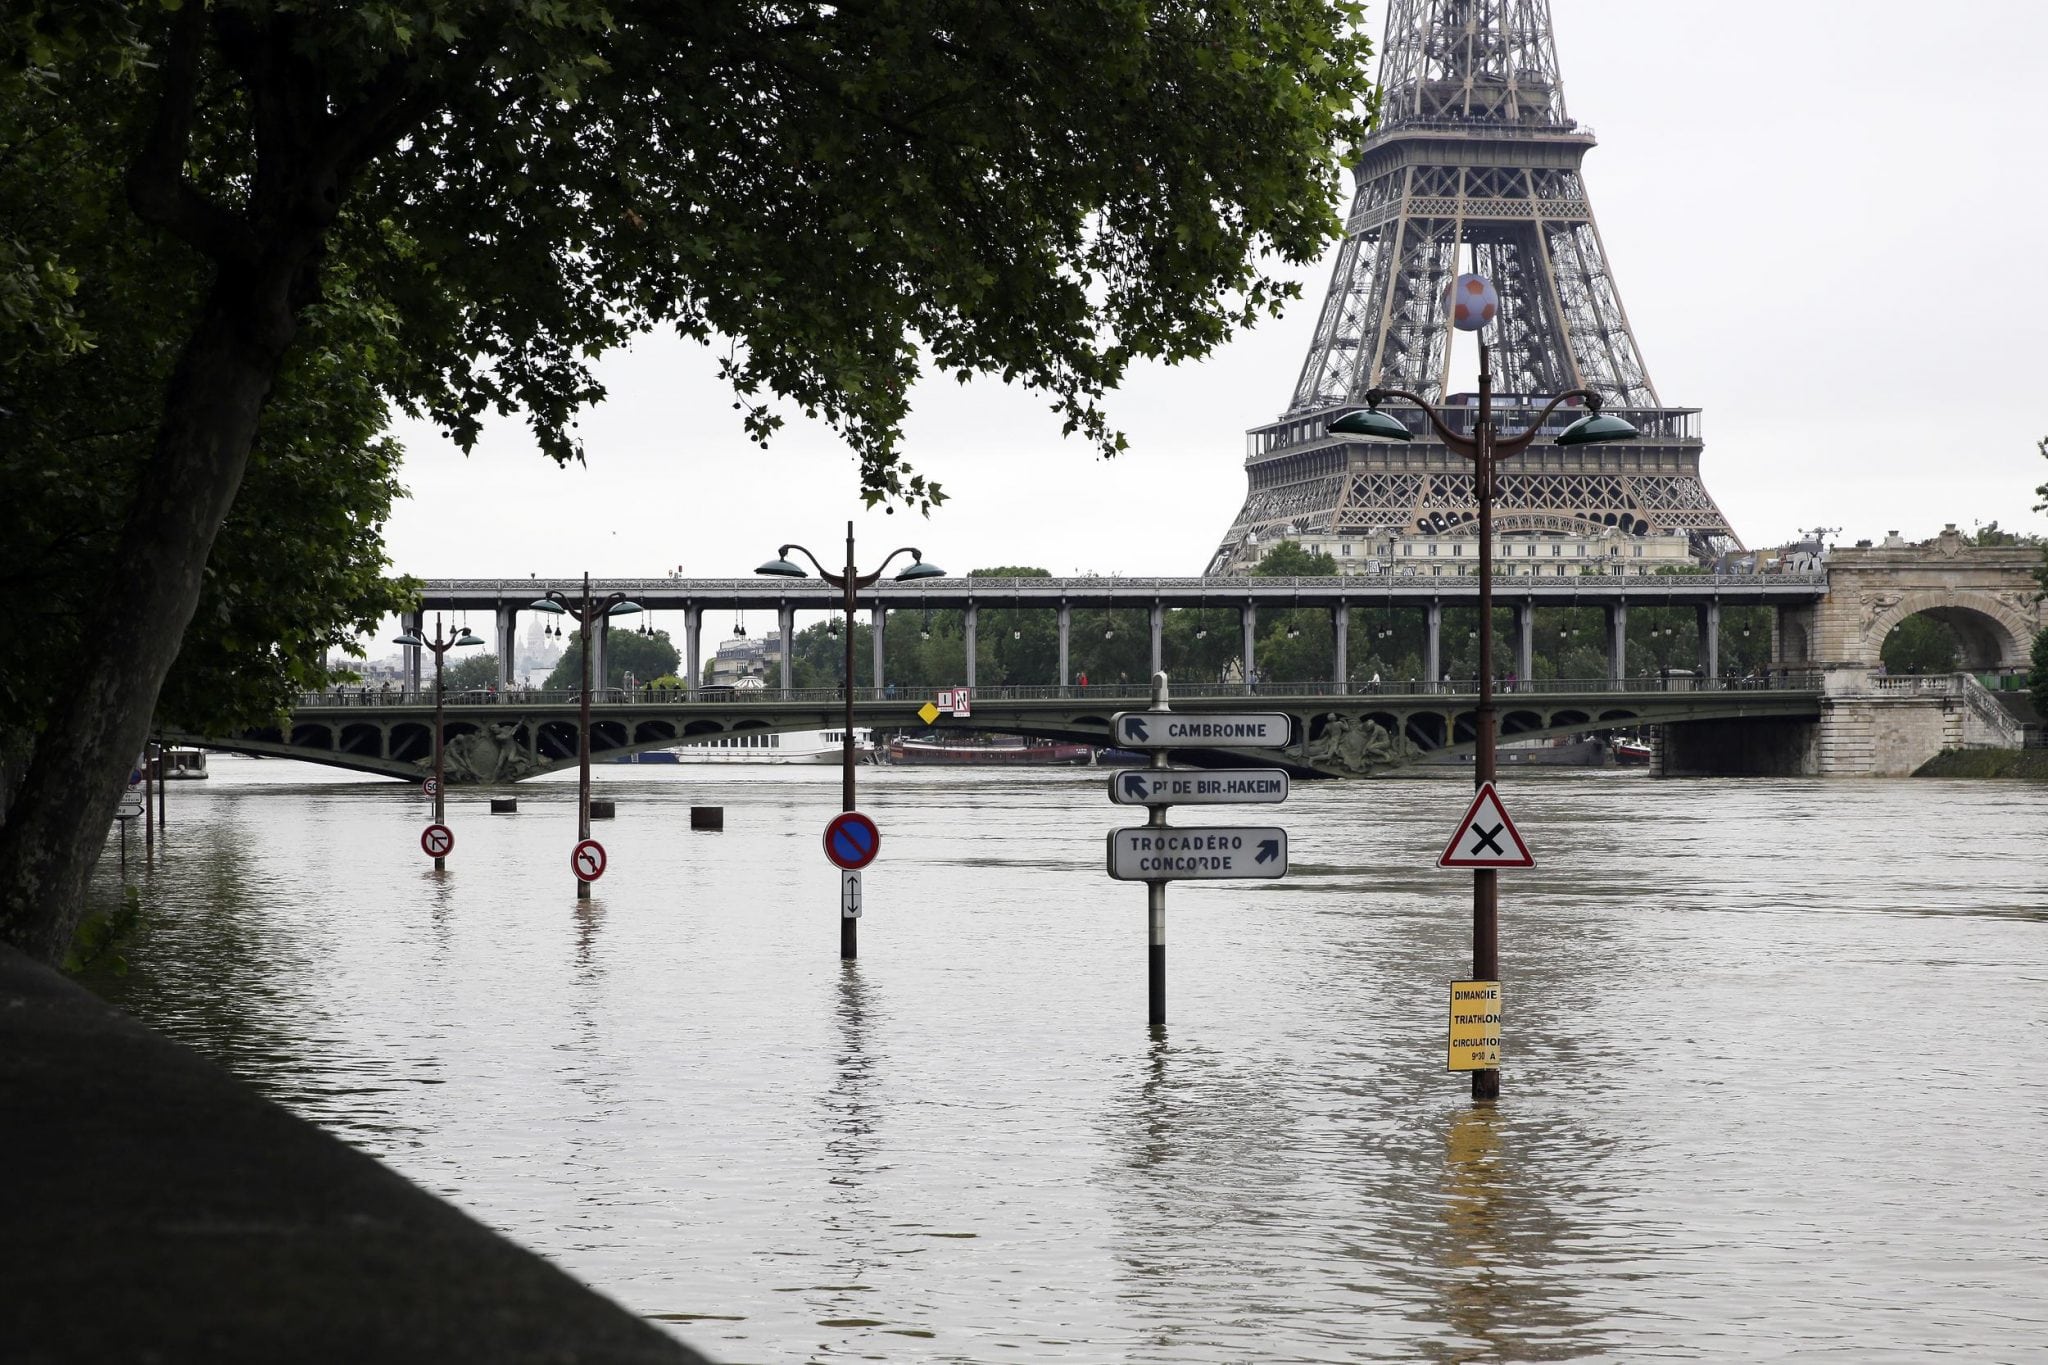 View of the flooded banks of the river Seine in front of the Eiffel tower in Paris, Friday, June 3, 2016. Both the Louvre and Orsay museums were closed as the Seine, which officials said was at its highest level in nearly 35 years, was expected to peak sometime later Friday. 